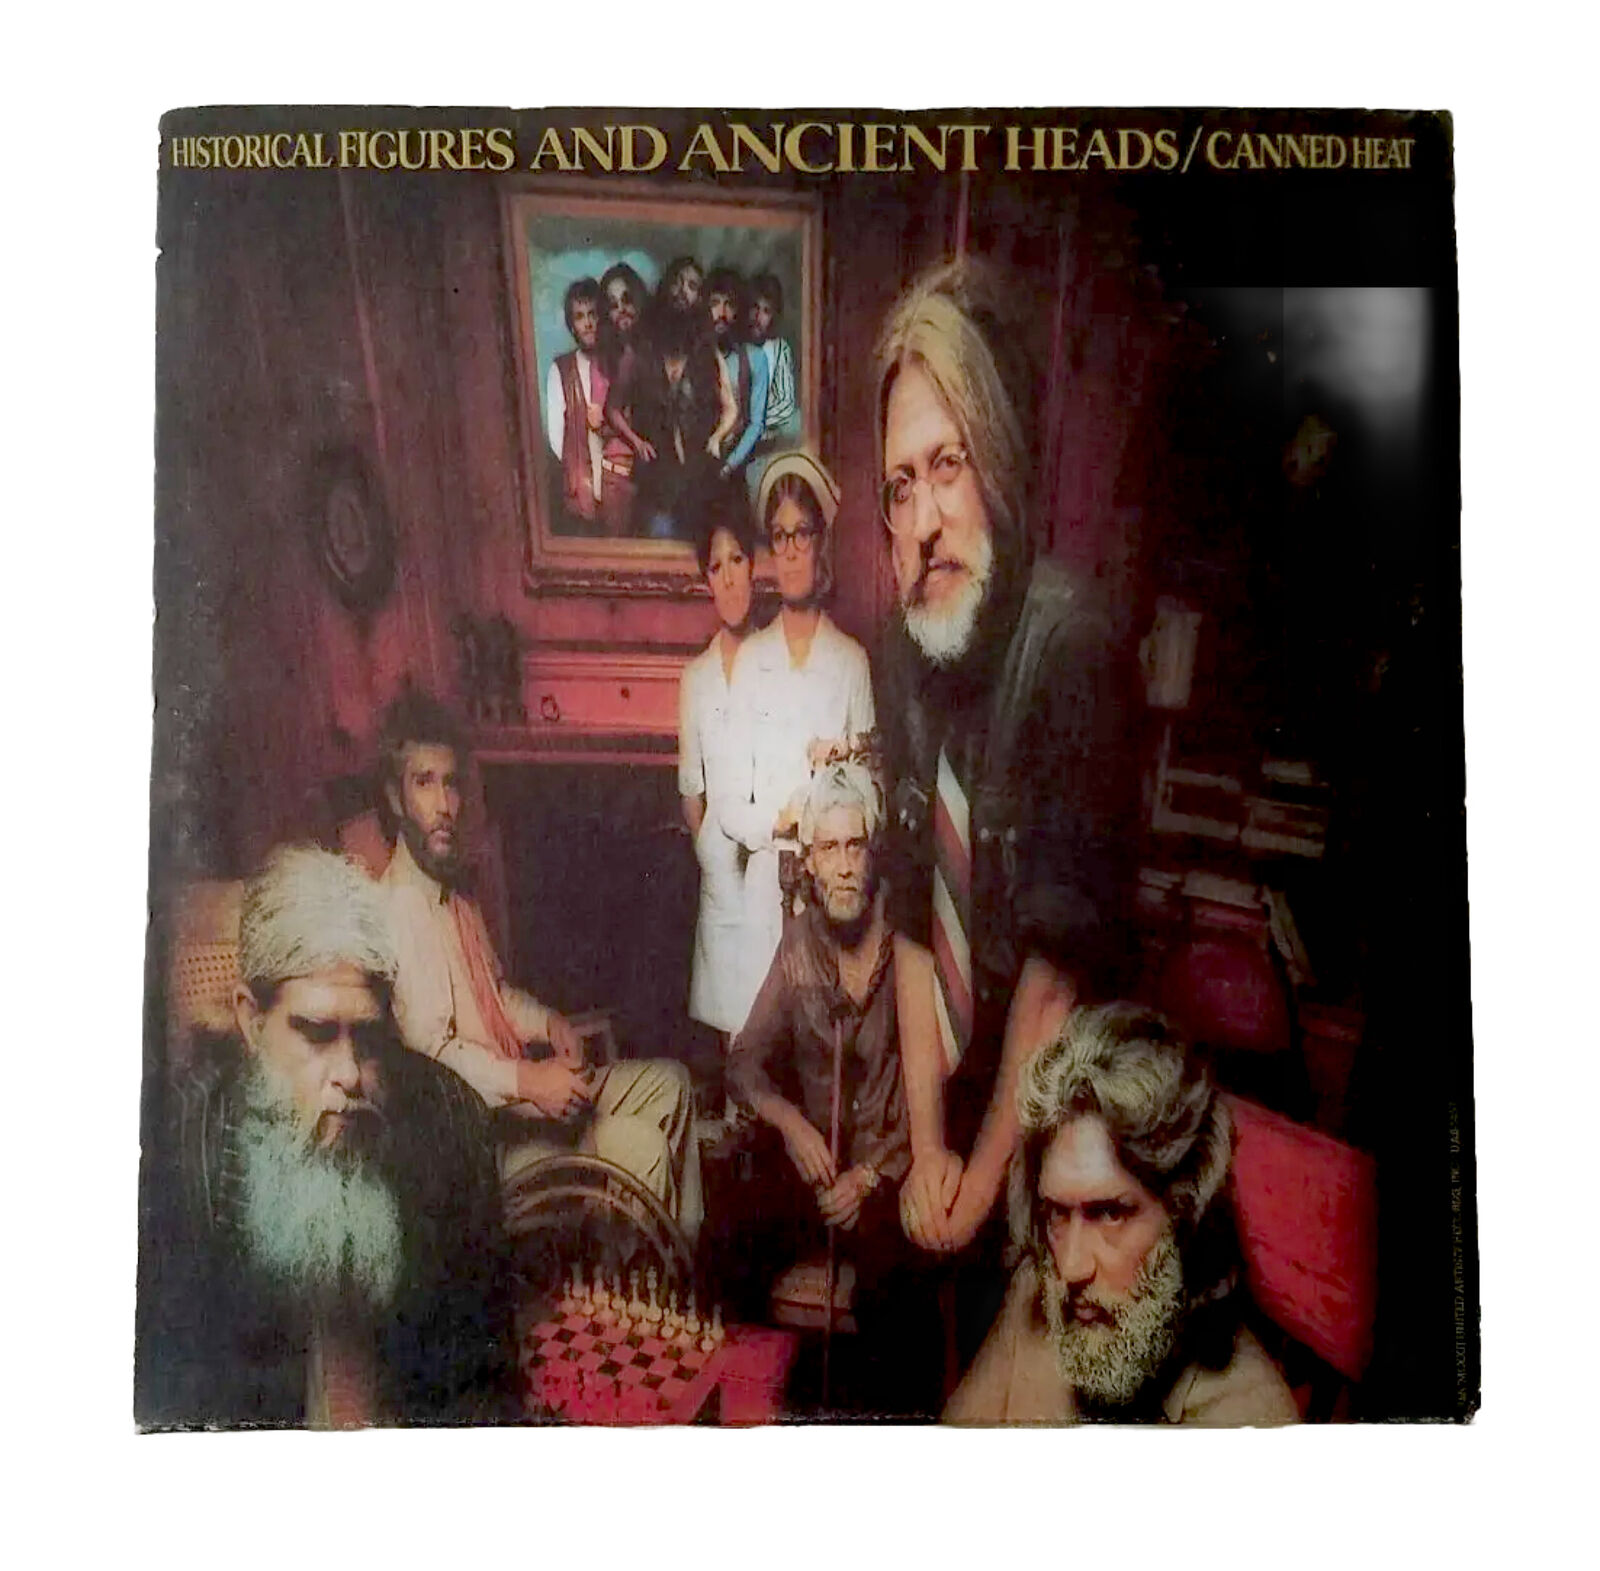 CANNED HEAT Historical Figures and Ancient Heads Vinyl LP Record VG+ Blues Rock